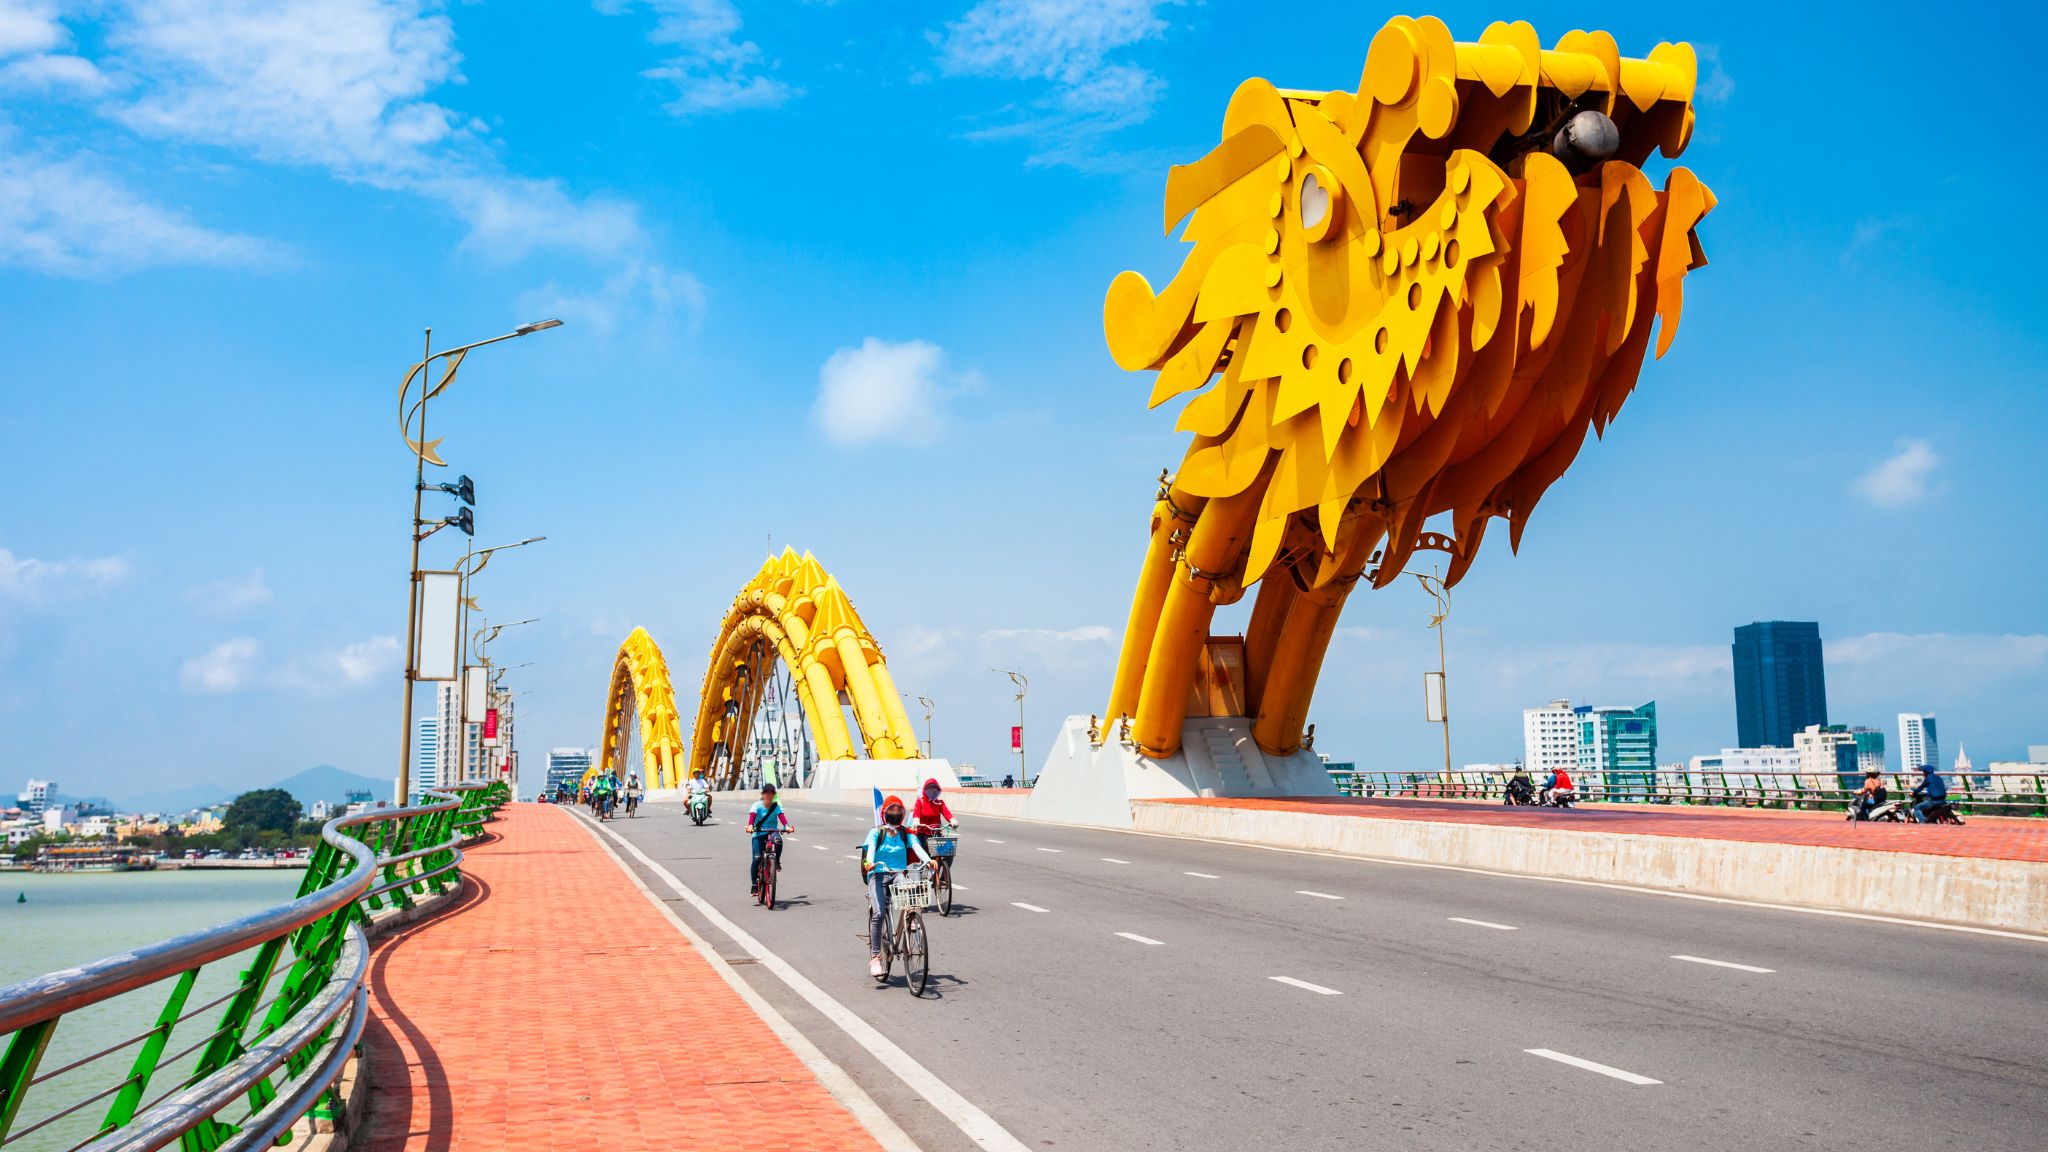 Day 6 Feel Free To Explore Da Nang On Your Own